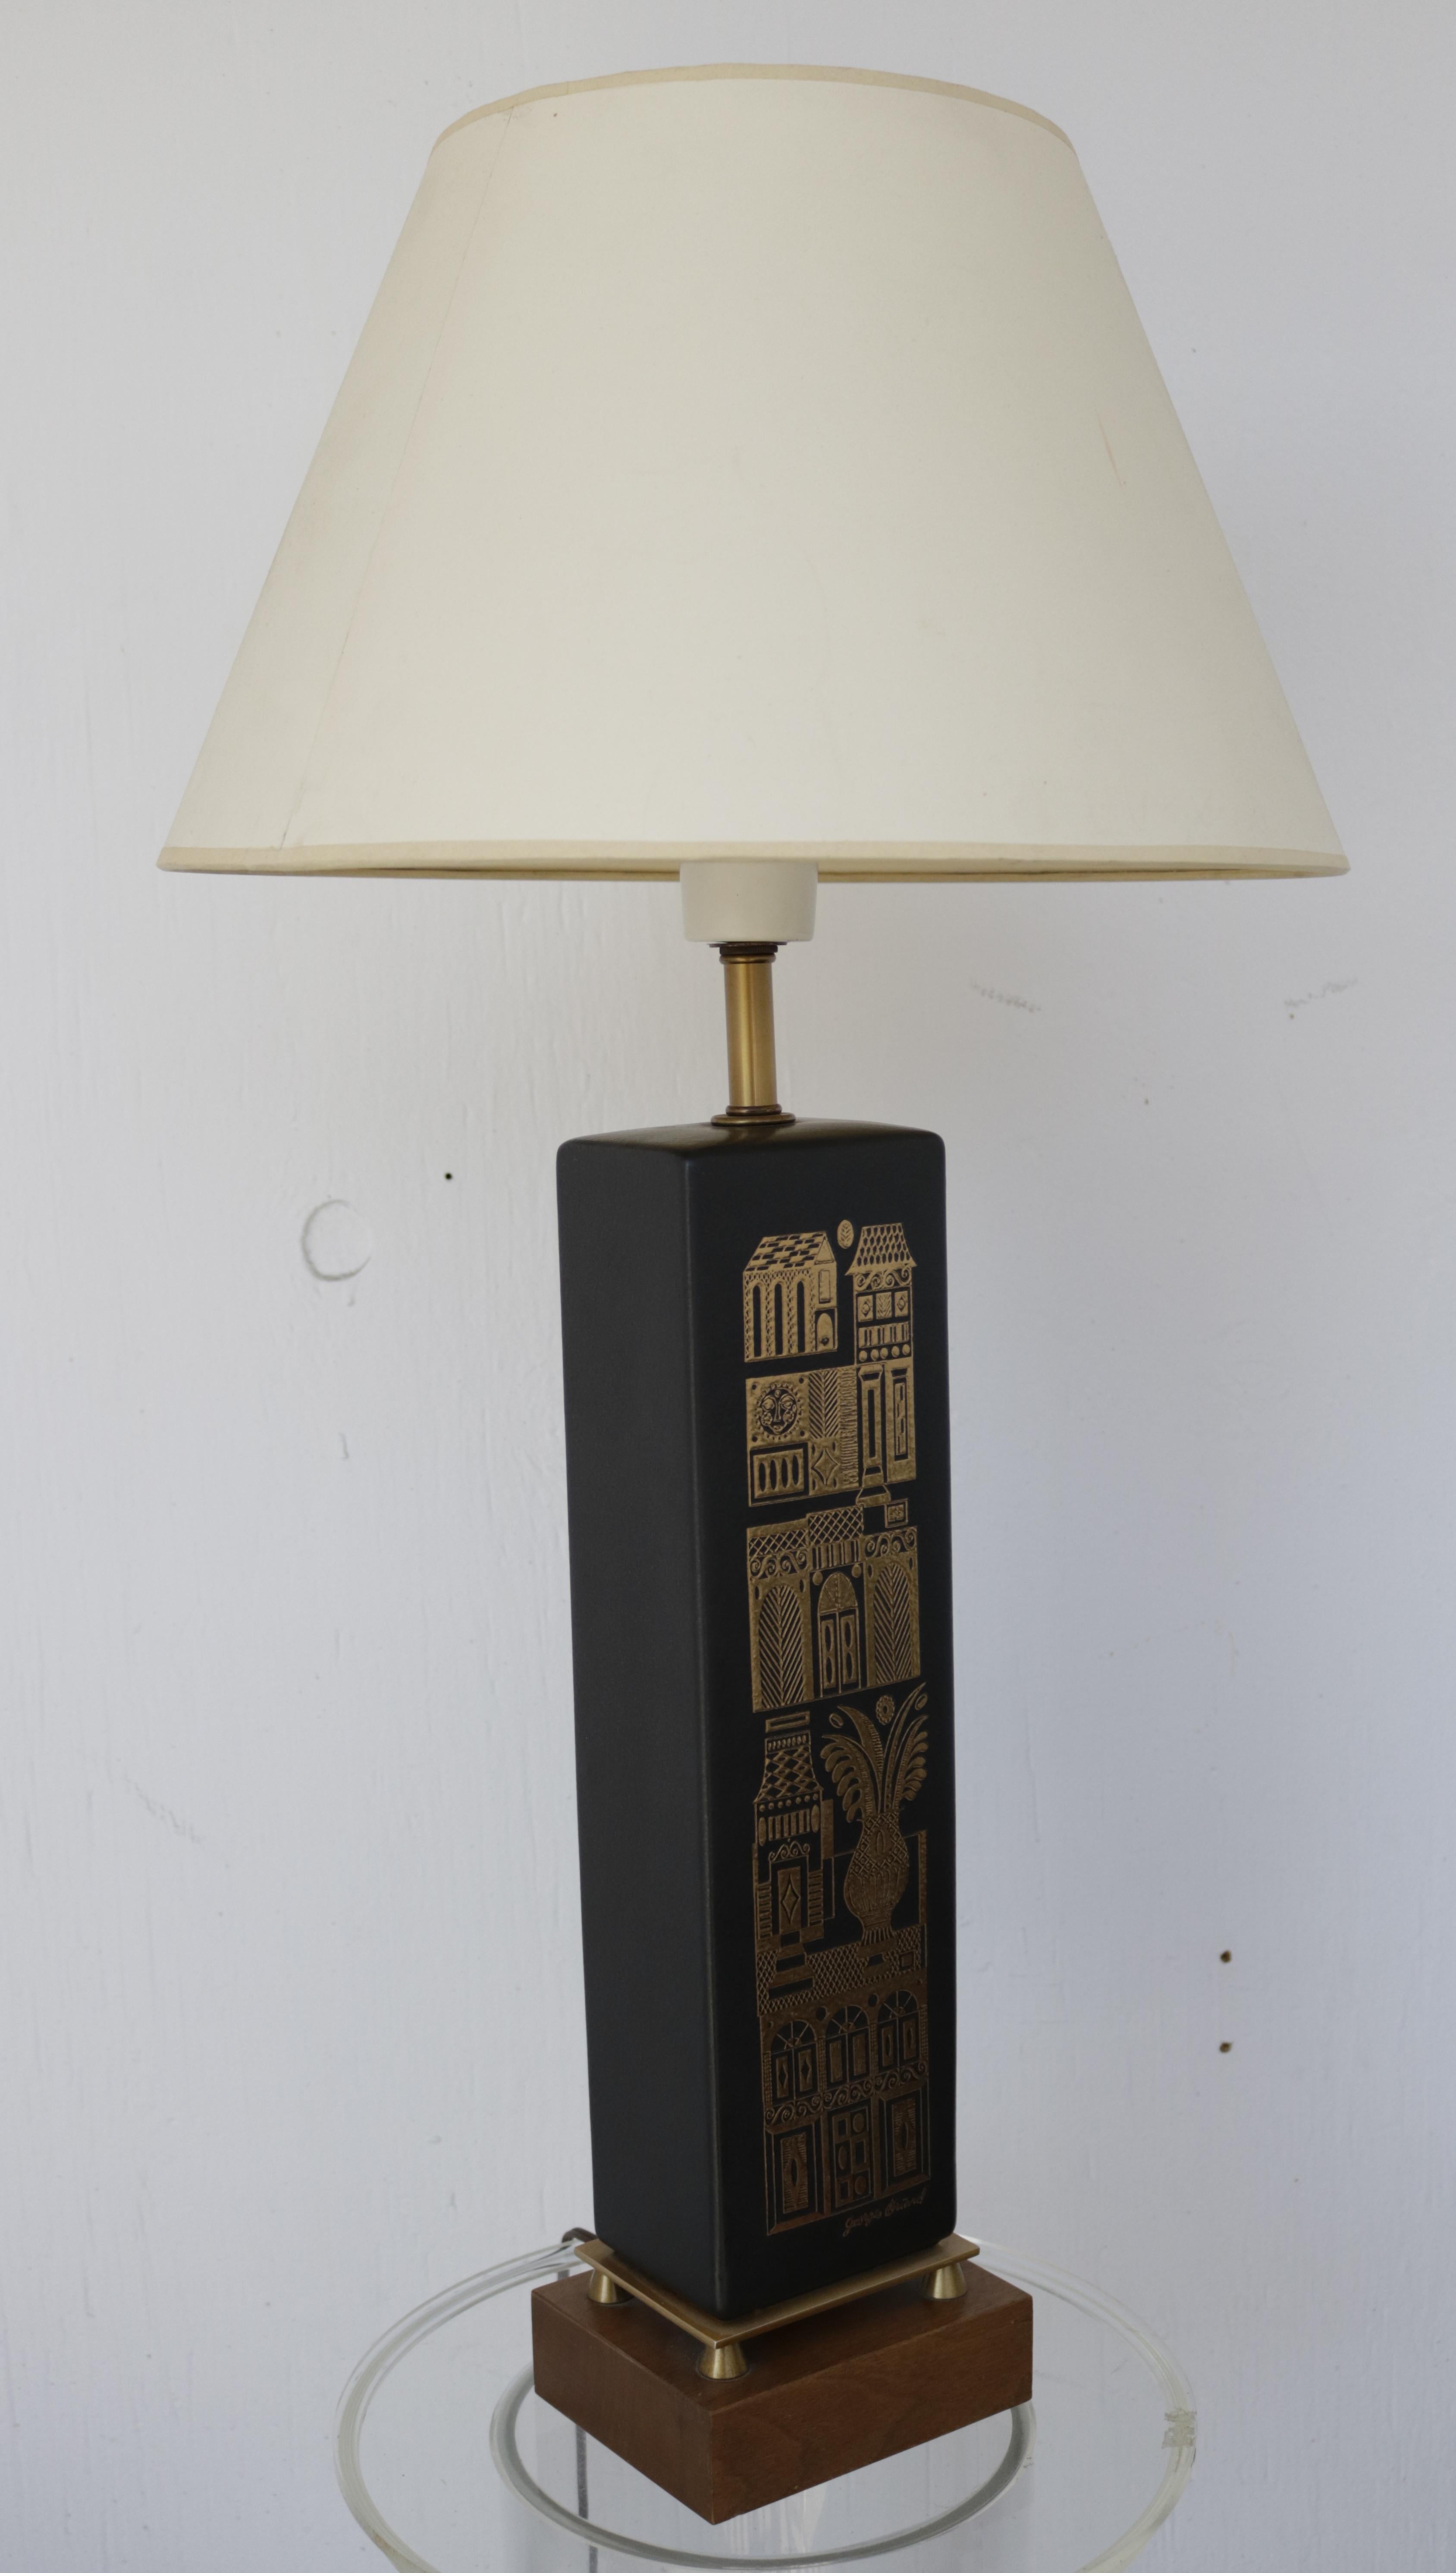 This stunning 1960s matt black ceramic accent lamp by Georges Briard features a gold embossed village scene and the signature of the artist. 
It stands on a brass stand and a walnut base. The off-white paper lampshade rests on a plastic holder that